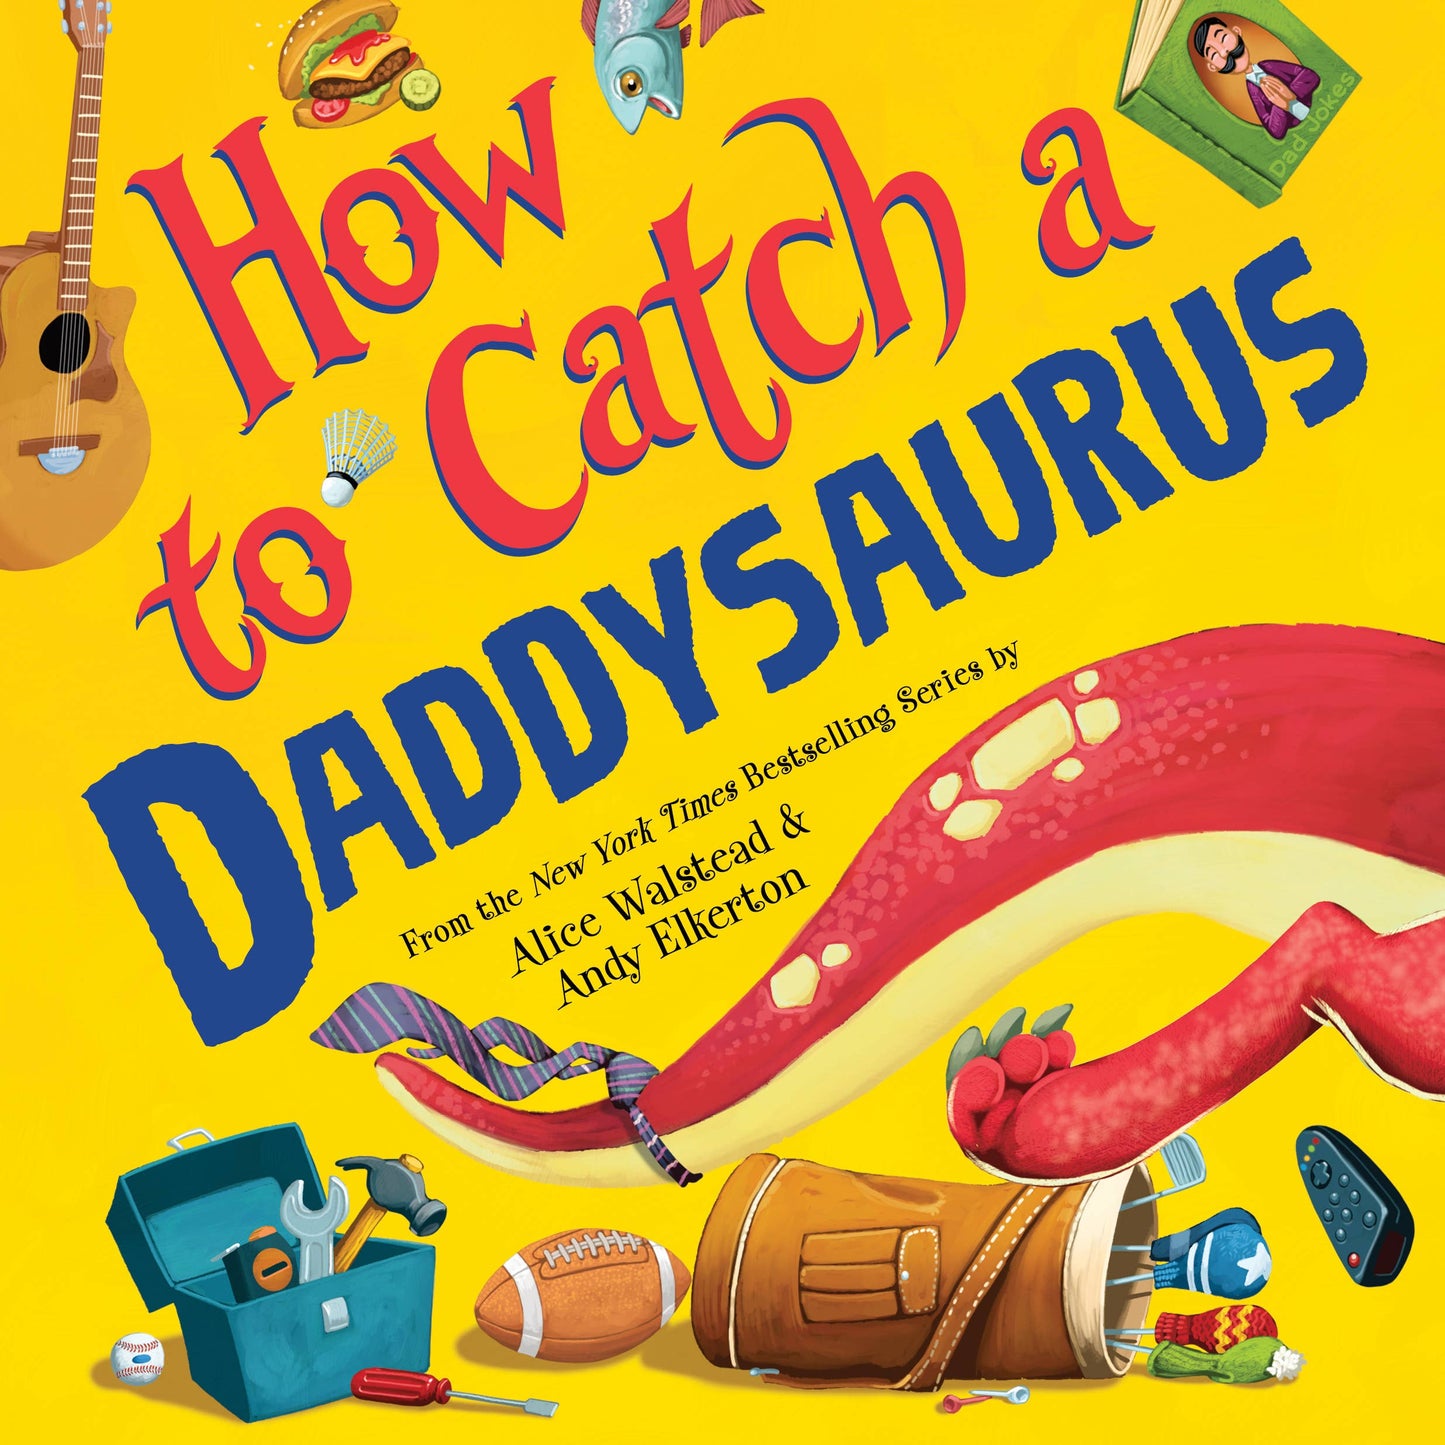 How to Catch a Daddysaurus (Hardcover Picture-book)